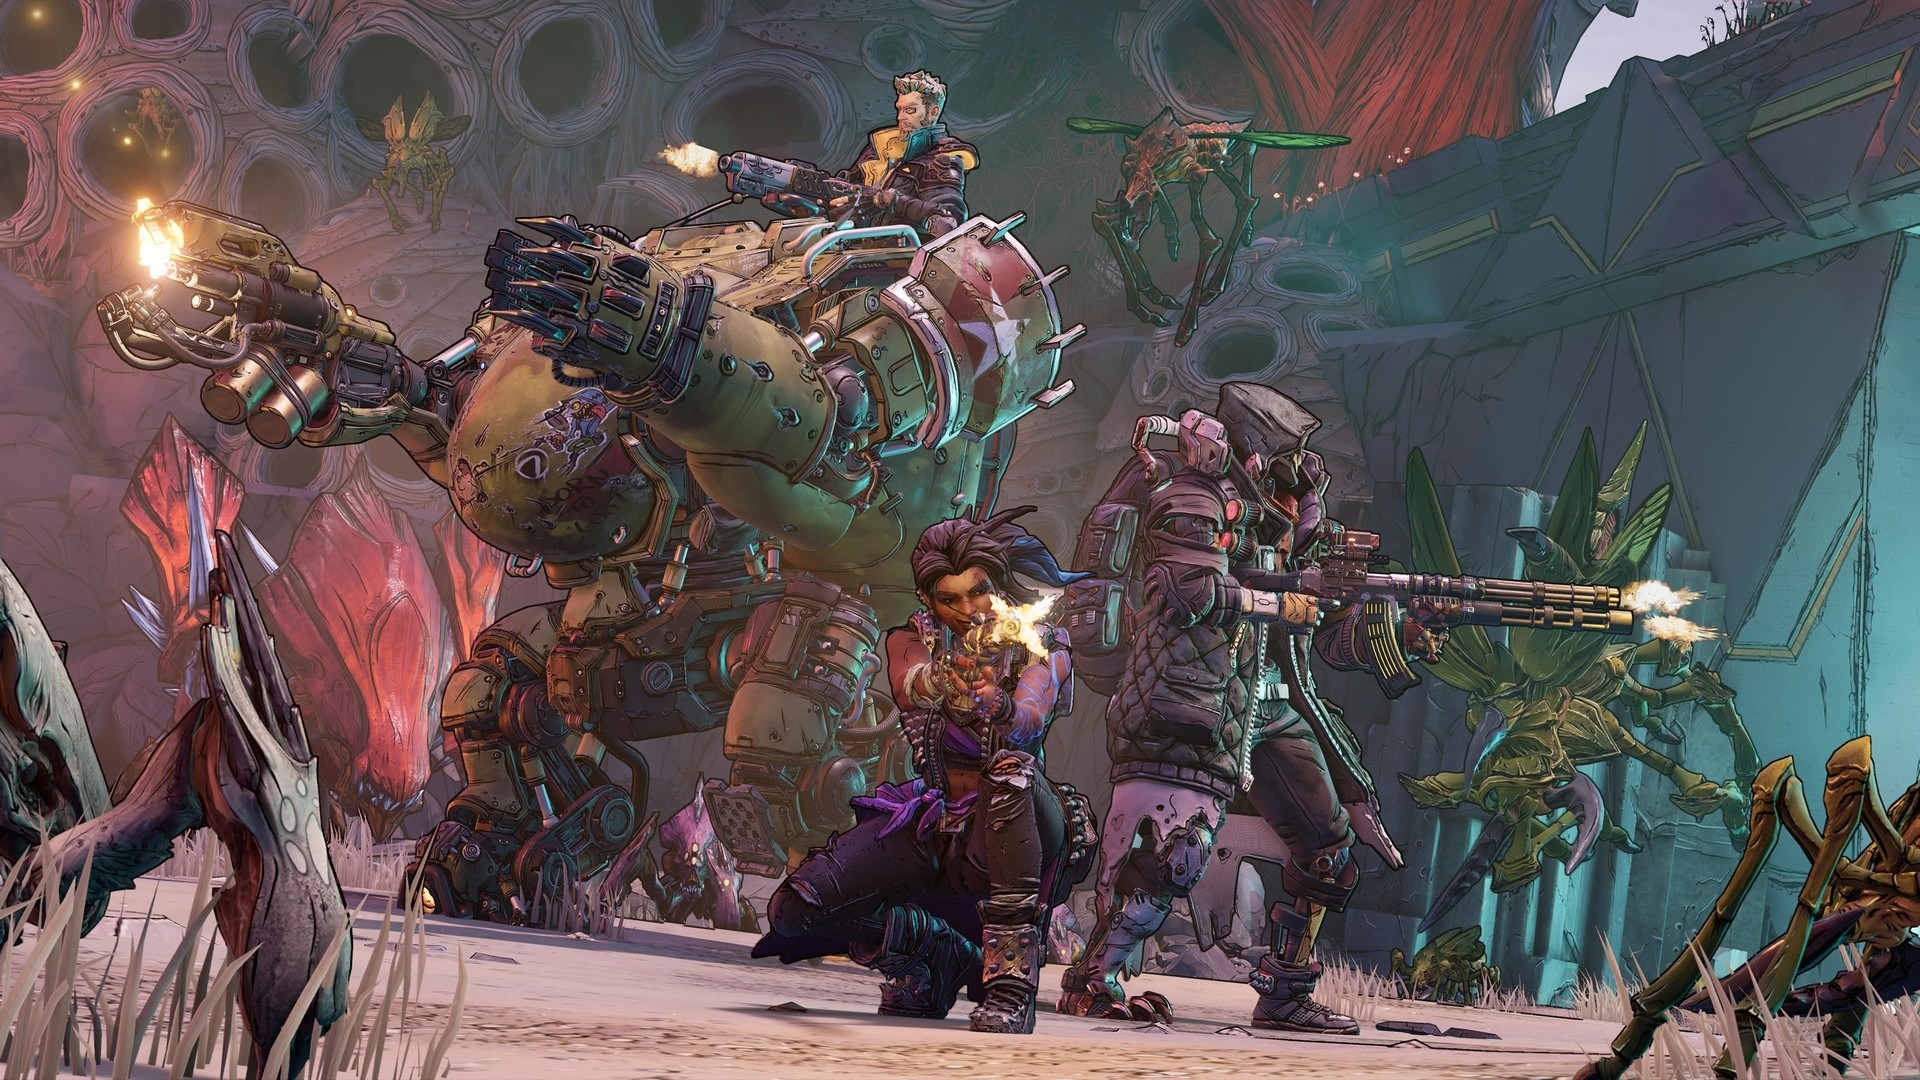 Today, we are going to cover how to create a Gearbox Software SHiFT account using Borderlands 3 so you can claim bonus in-game items and join special events.